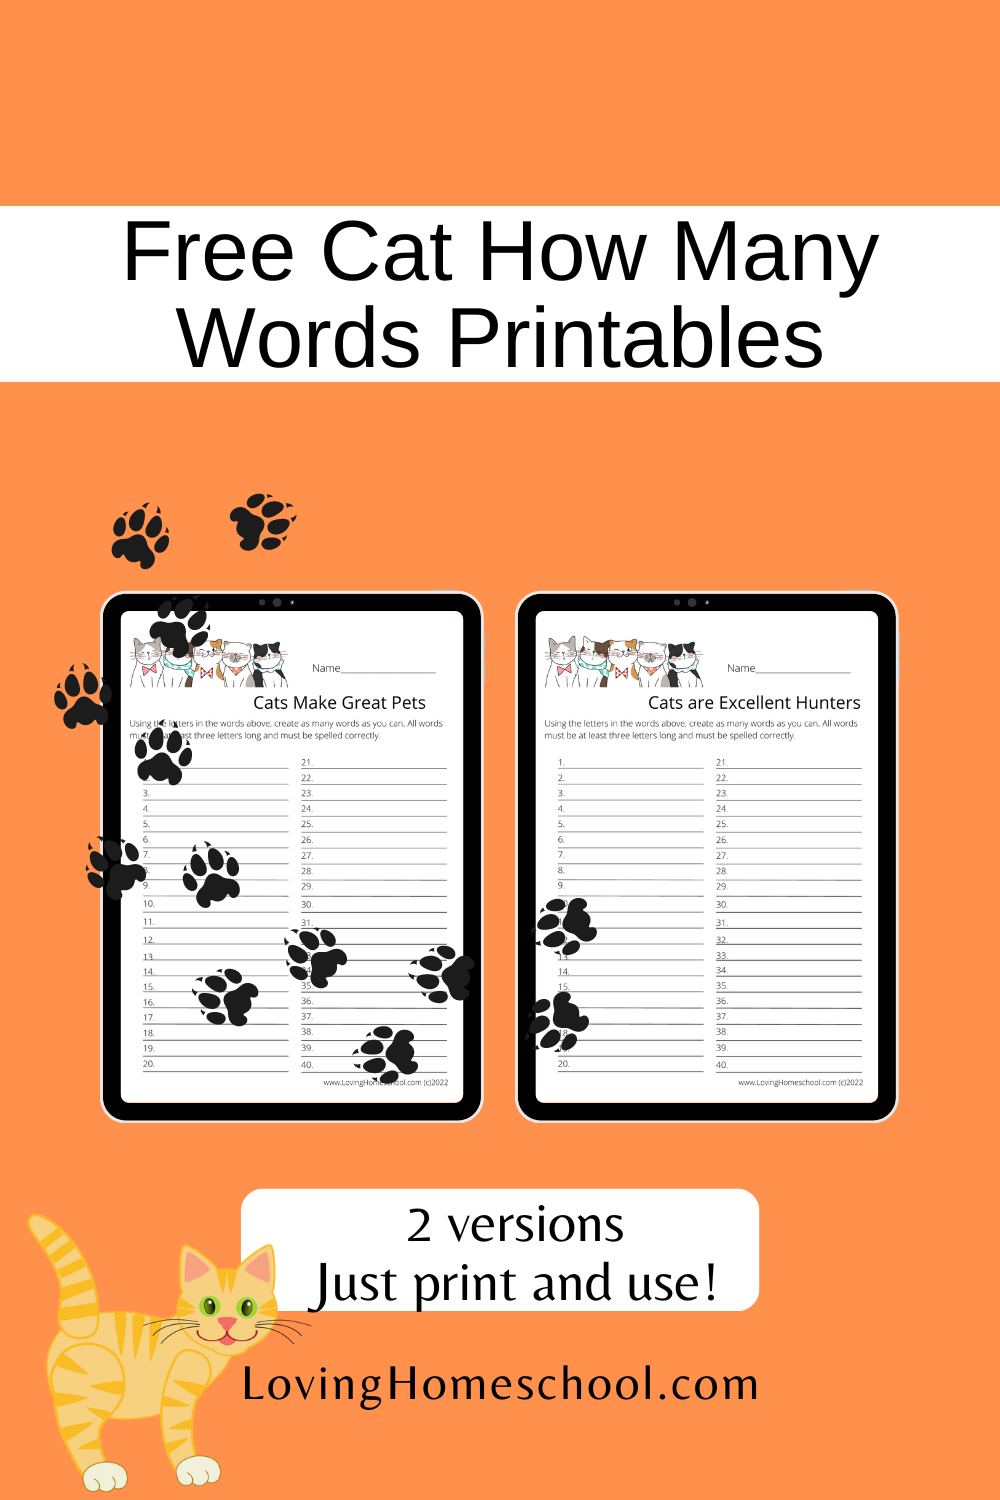 Cat How Many Words Printables Pinterest Pin